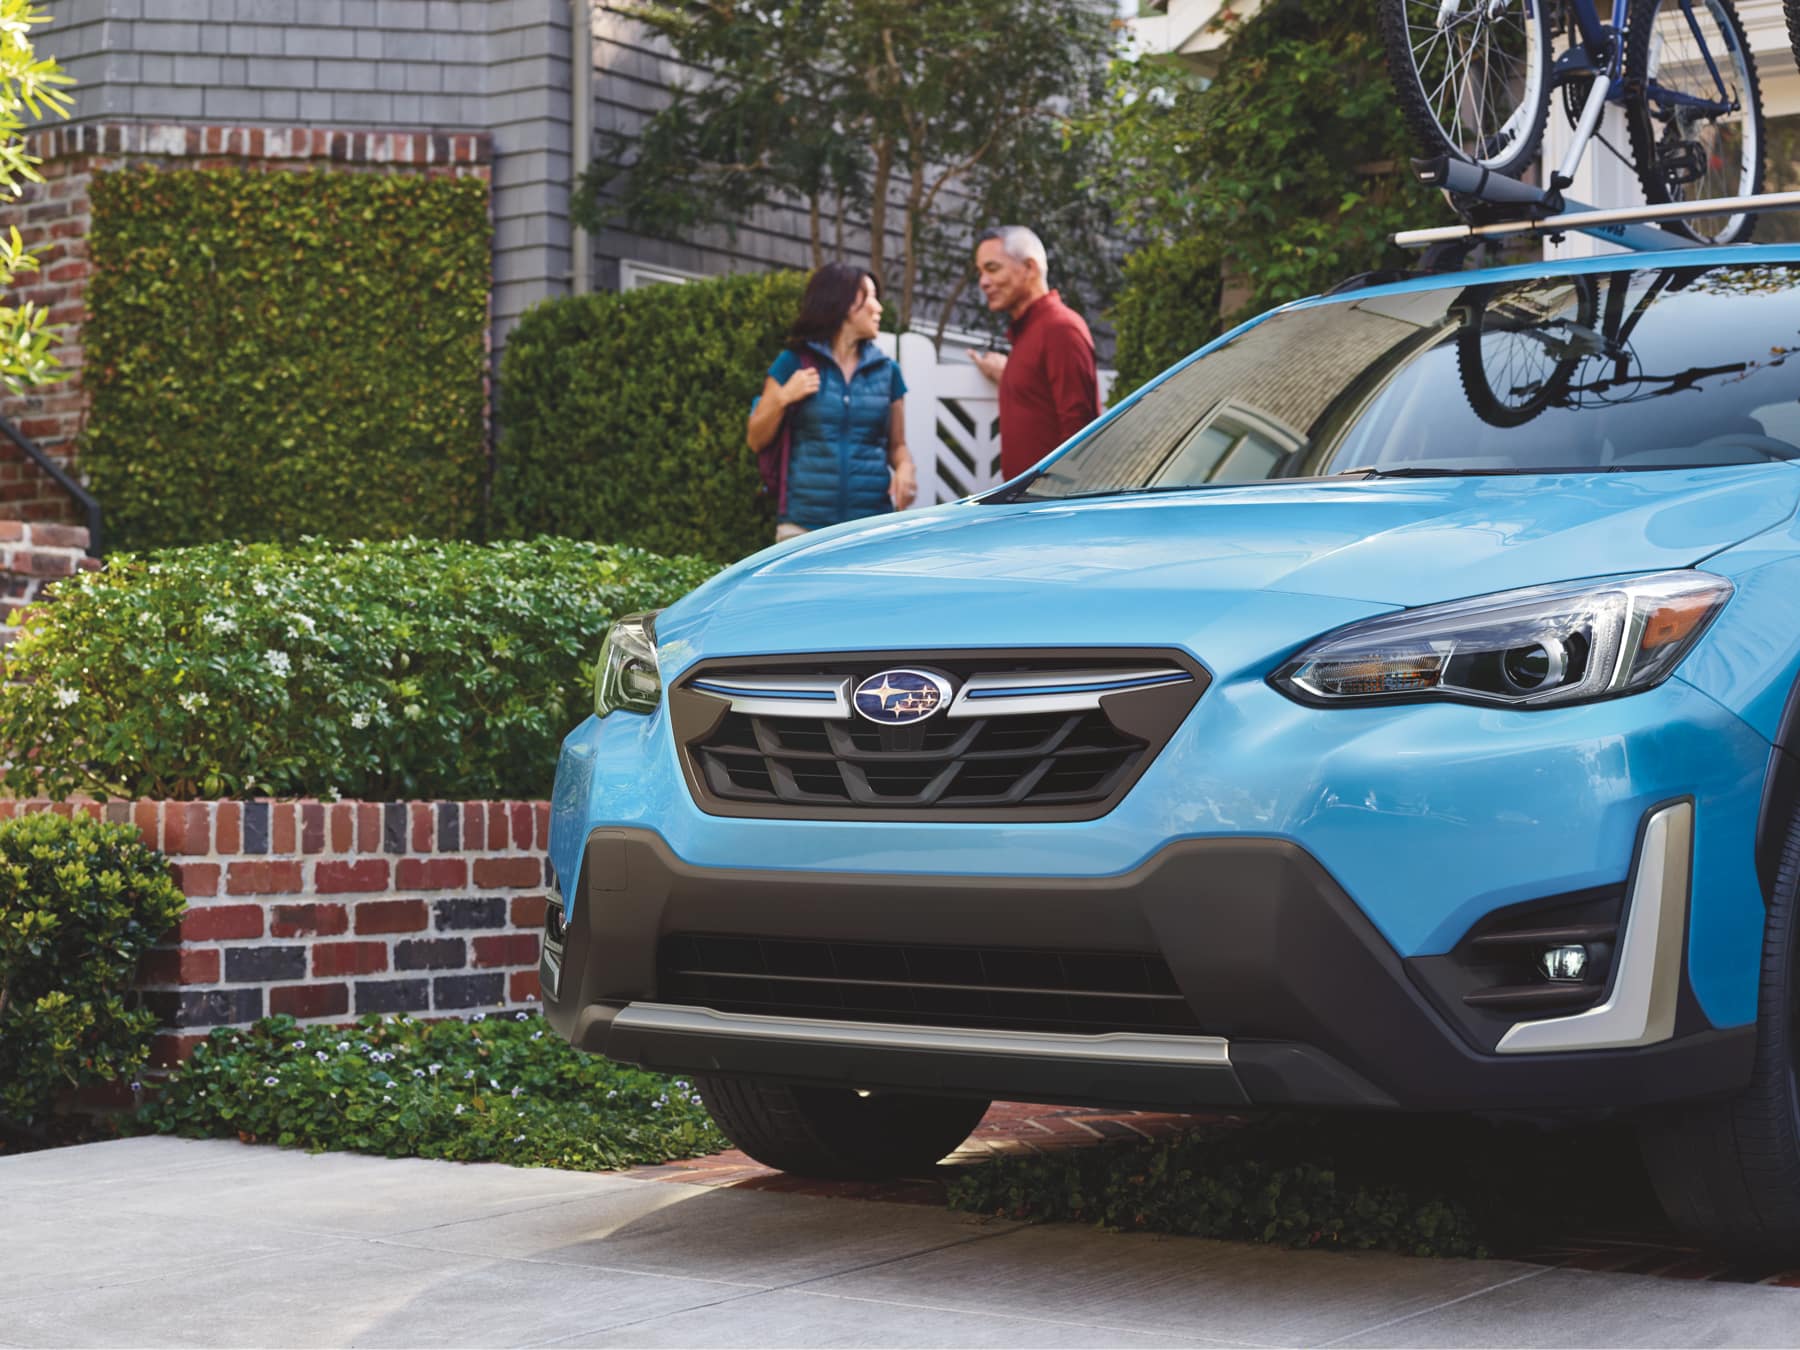 2022 Subaru Crosstrek Hybrid with bicycles mounted on top and parked in front of brick house